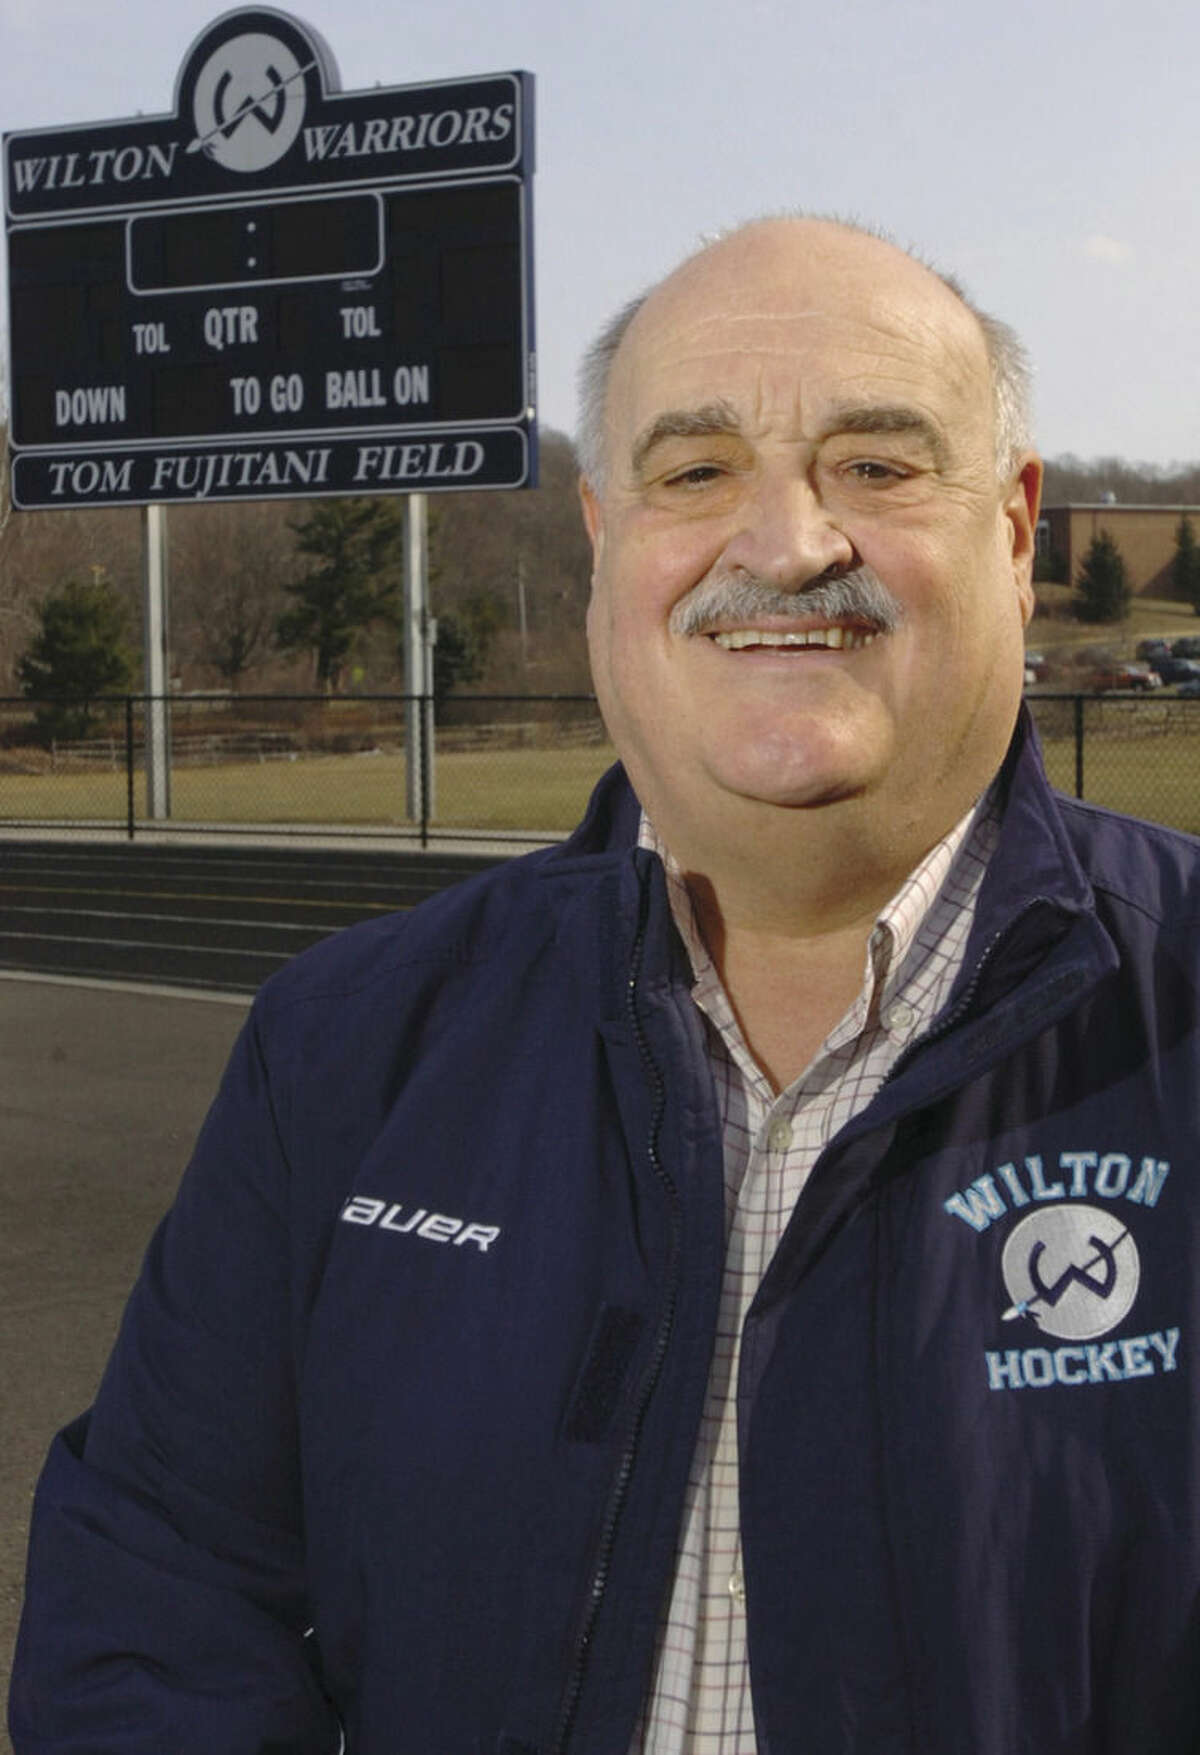 Hour photo/Erik Trautmann Christy Hayes, Wilton High School's former athletic director and three-sport coach at St. Joseph, will be inducted into the Connecticut High School Hall of Fame.